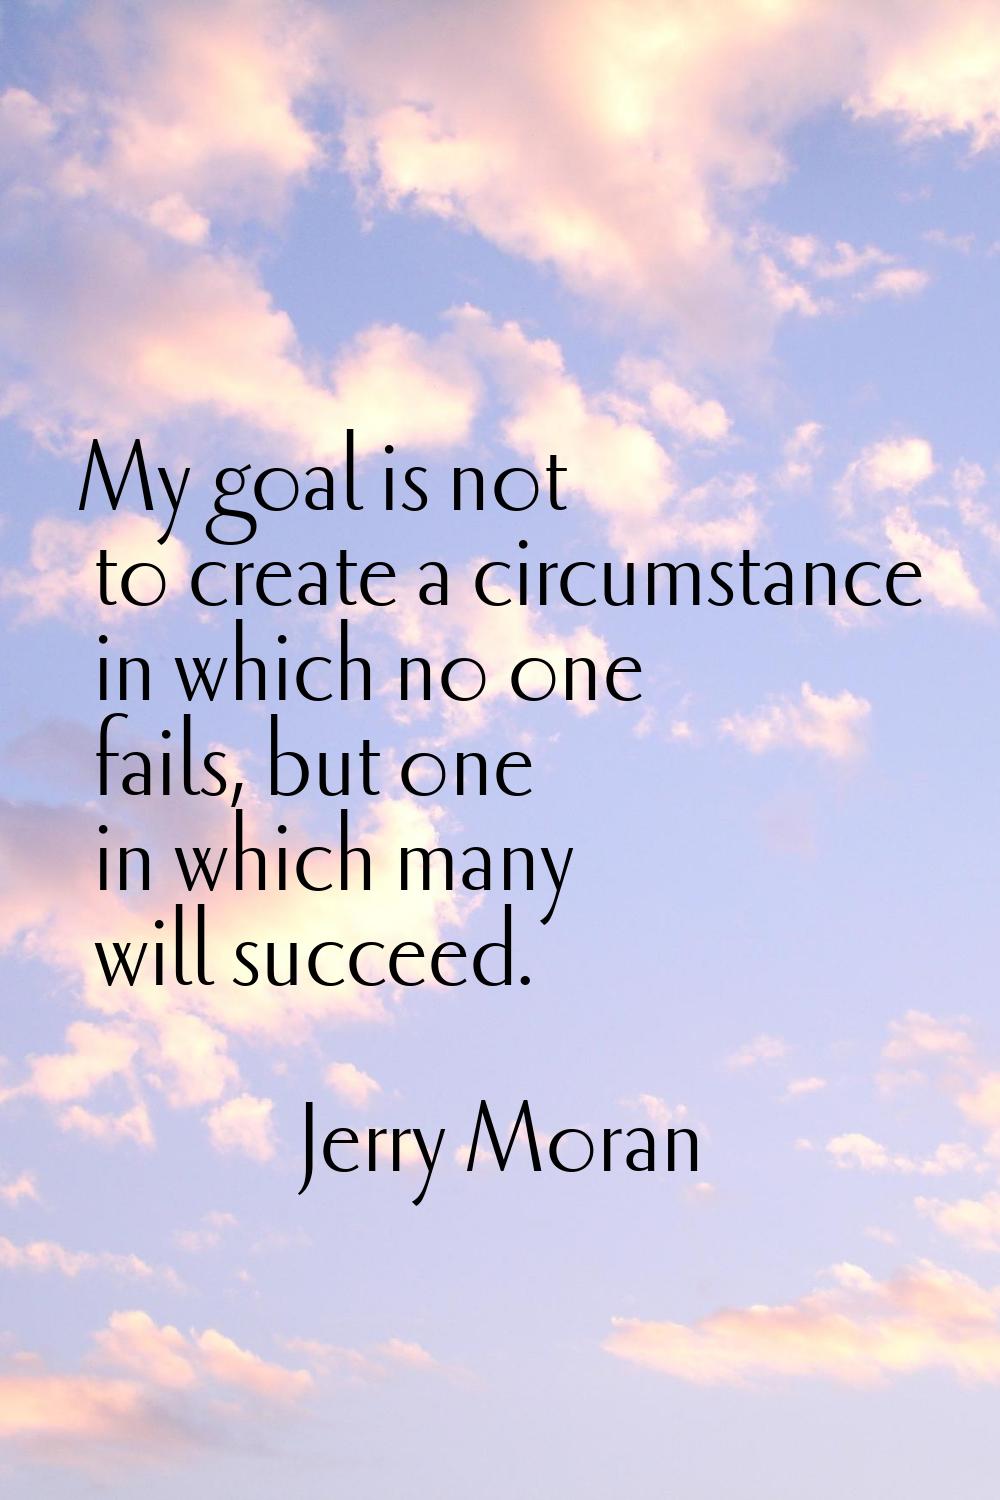 My goal is not to create a circumstance in which no one fails, but one in which many will succeed.